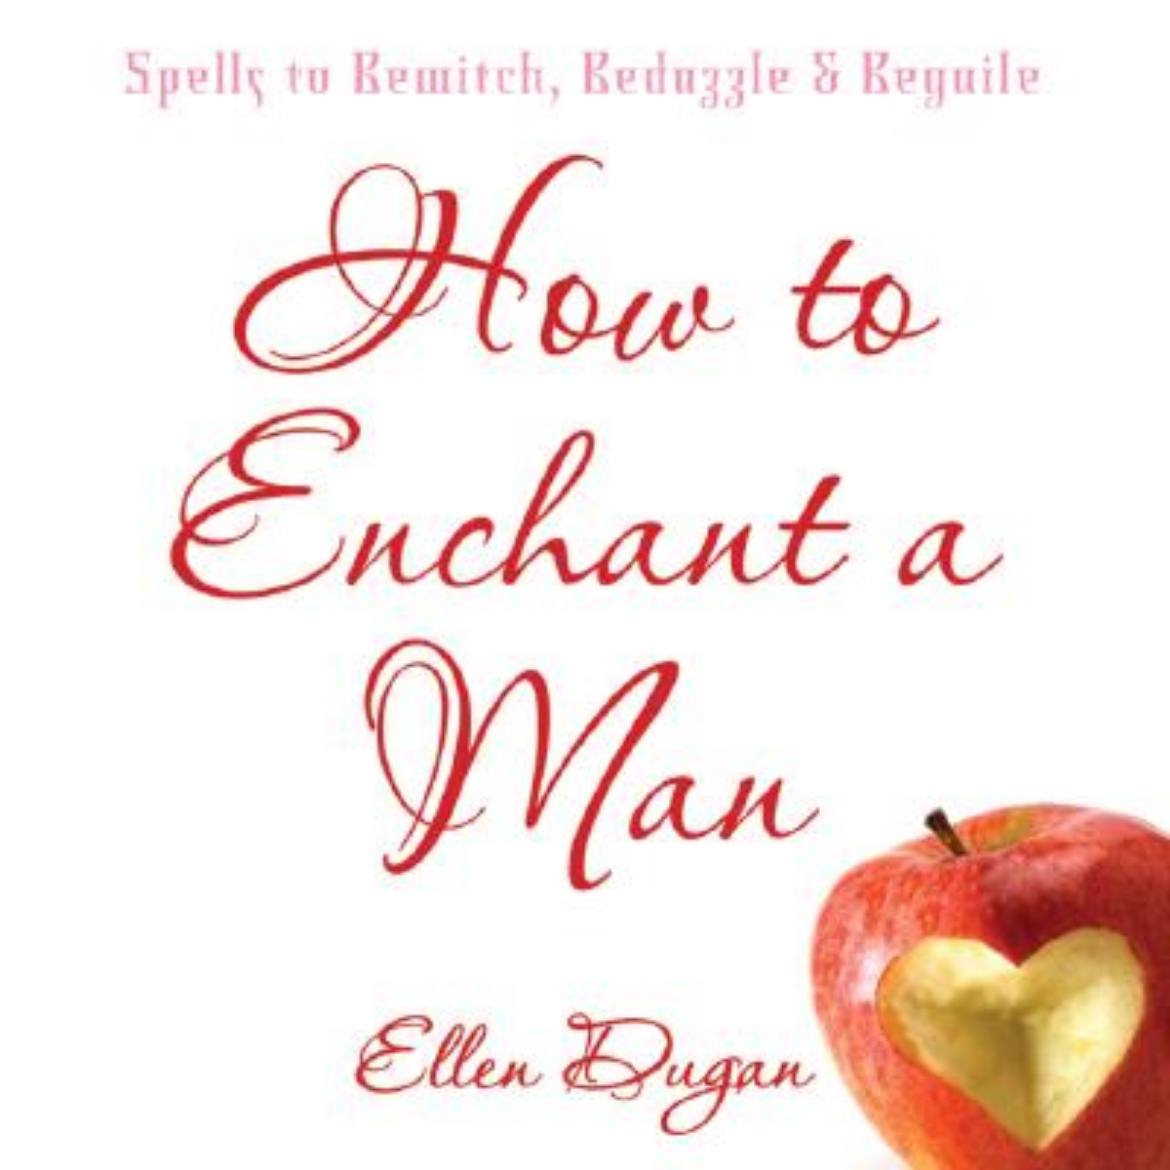 Picture of How to enchant a man - spells to bewitch, bedazzle and beguile